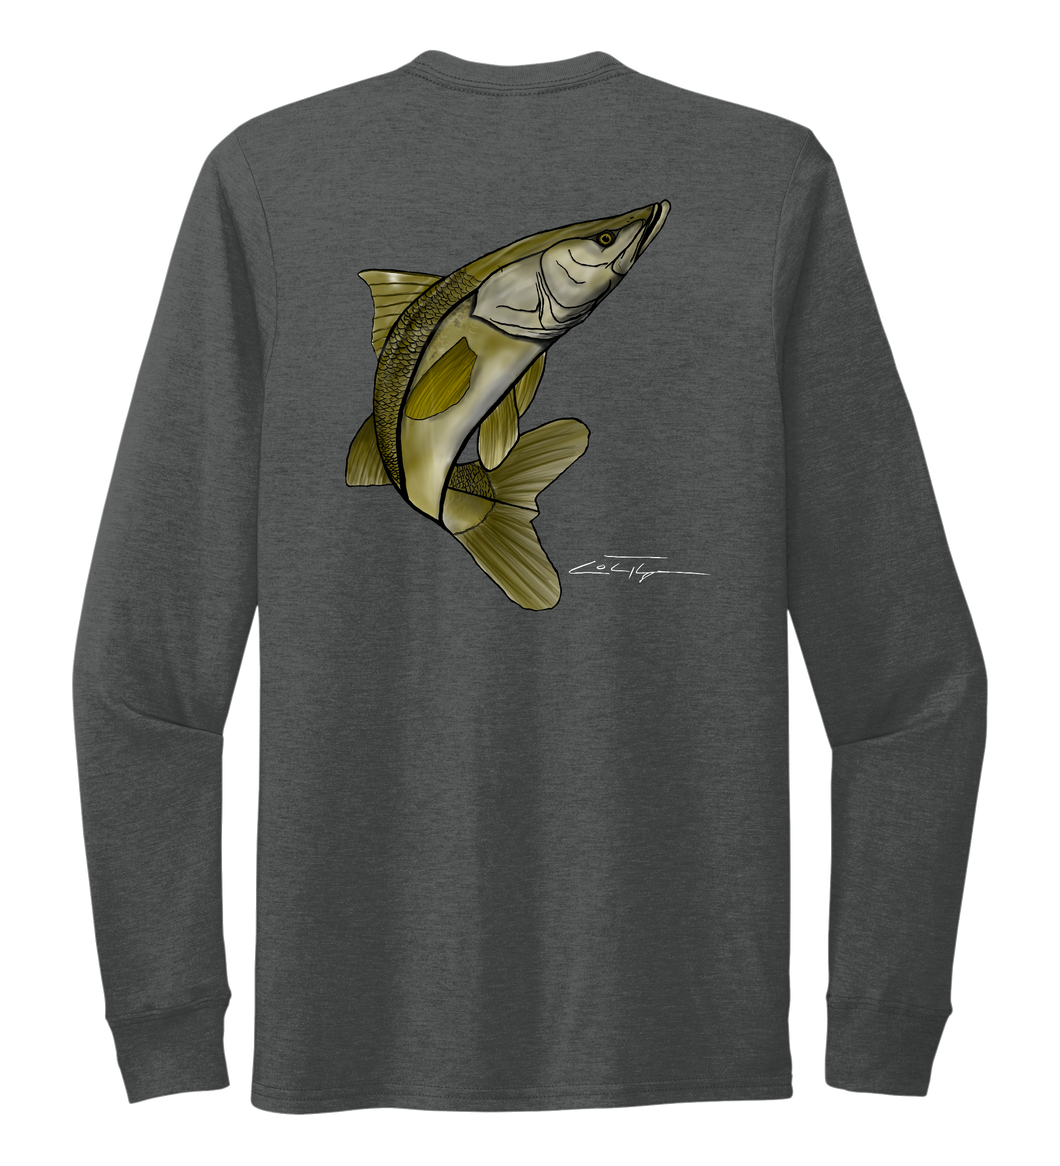 Colin Thompson, Snook, Crew Neck Long Sleeve T-Shirt in Slate Black